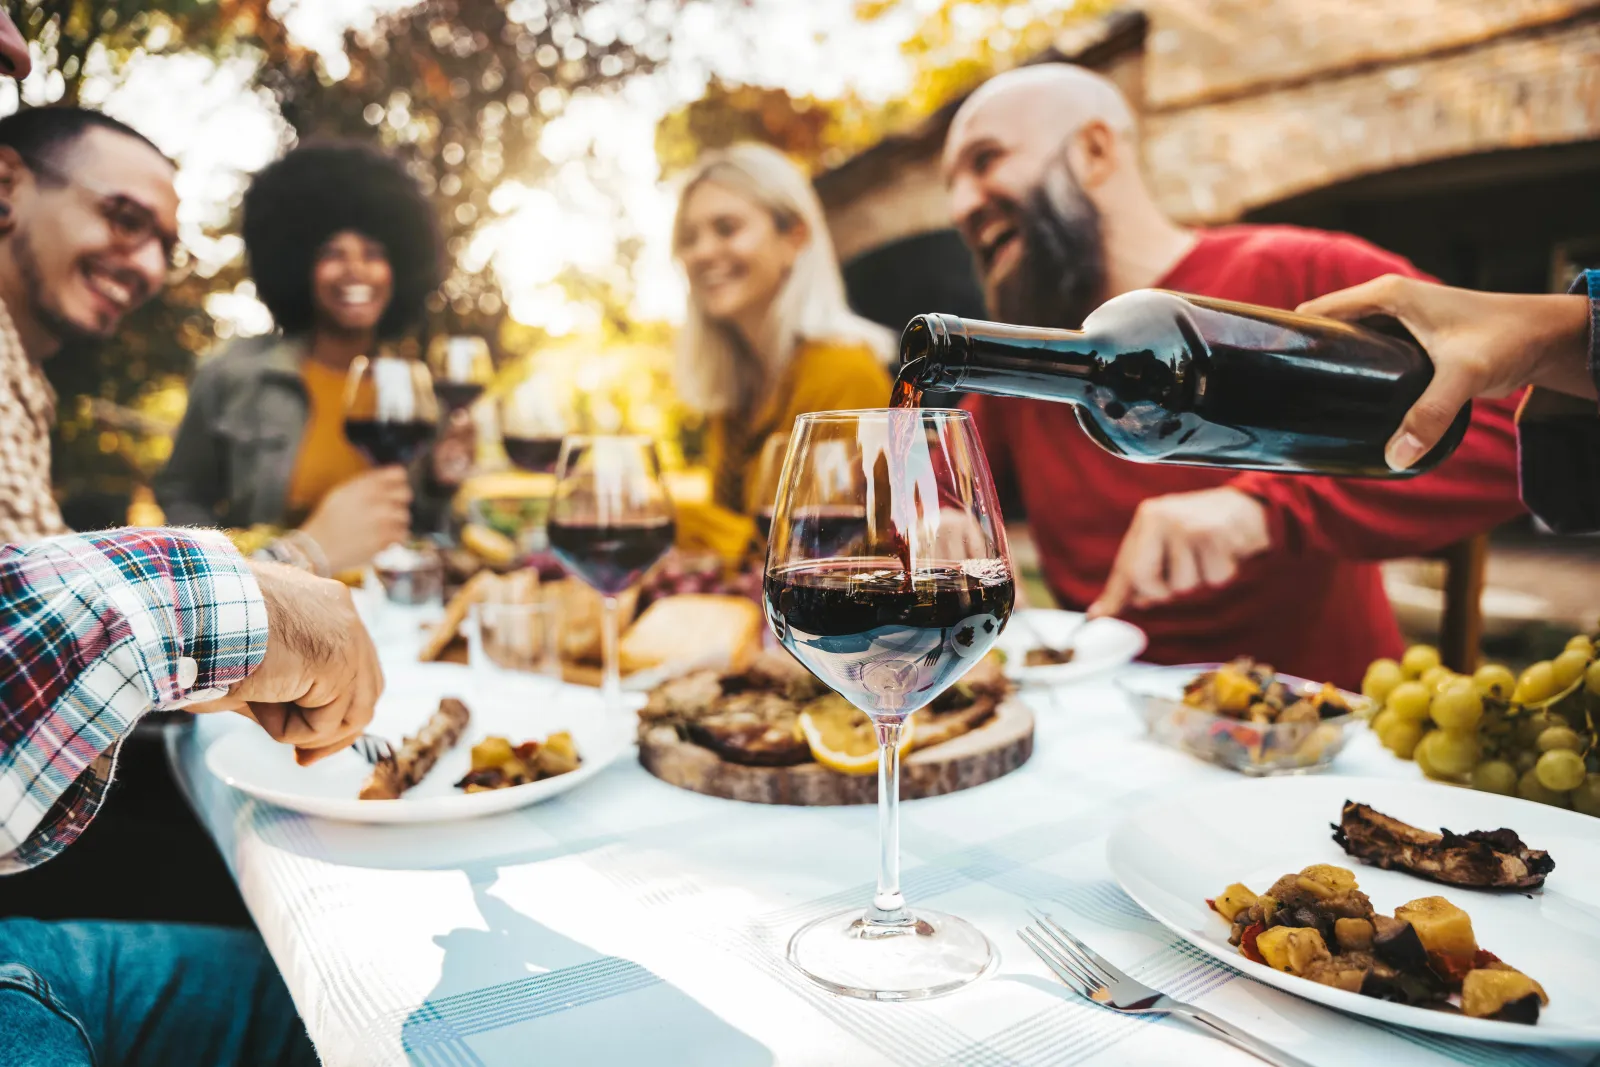 a group of people sitting at a table with food and wine